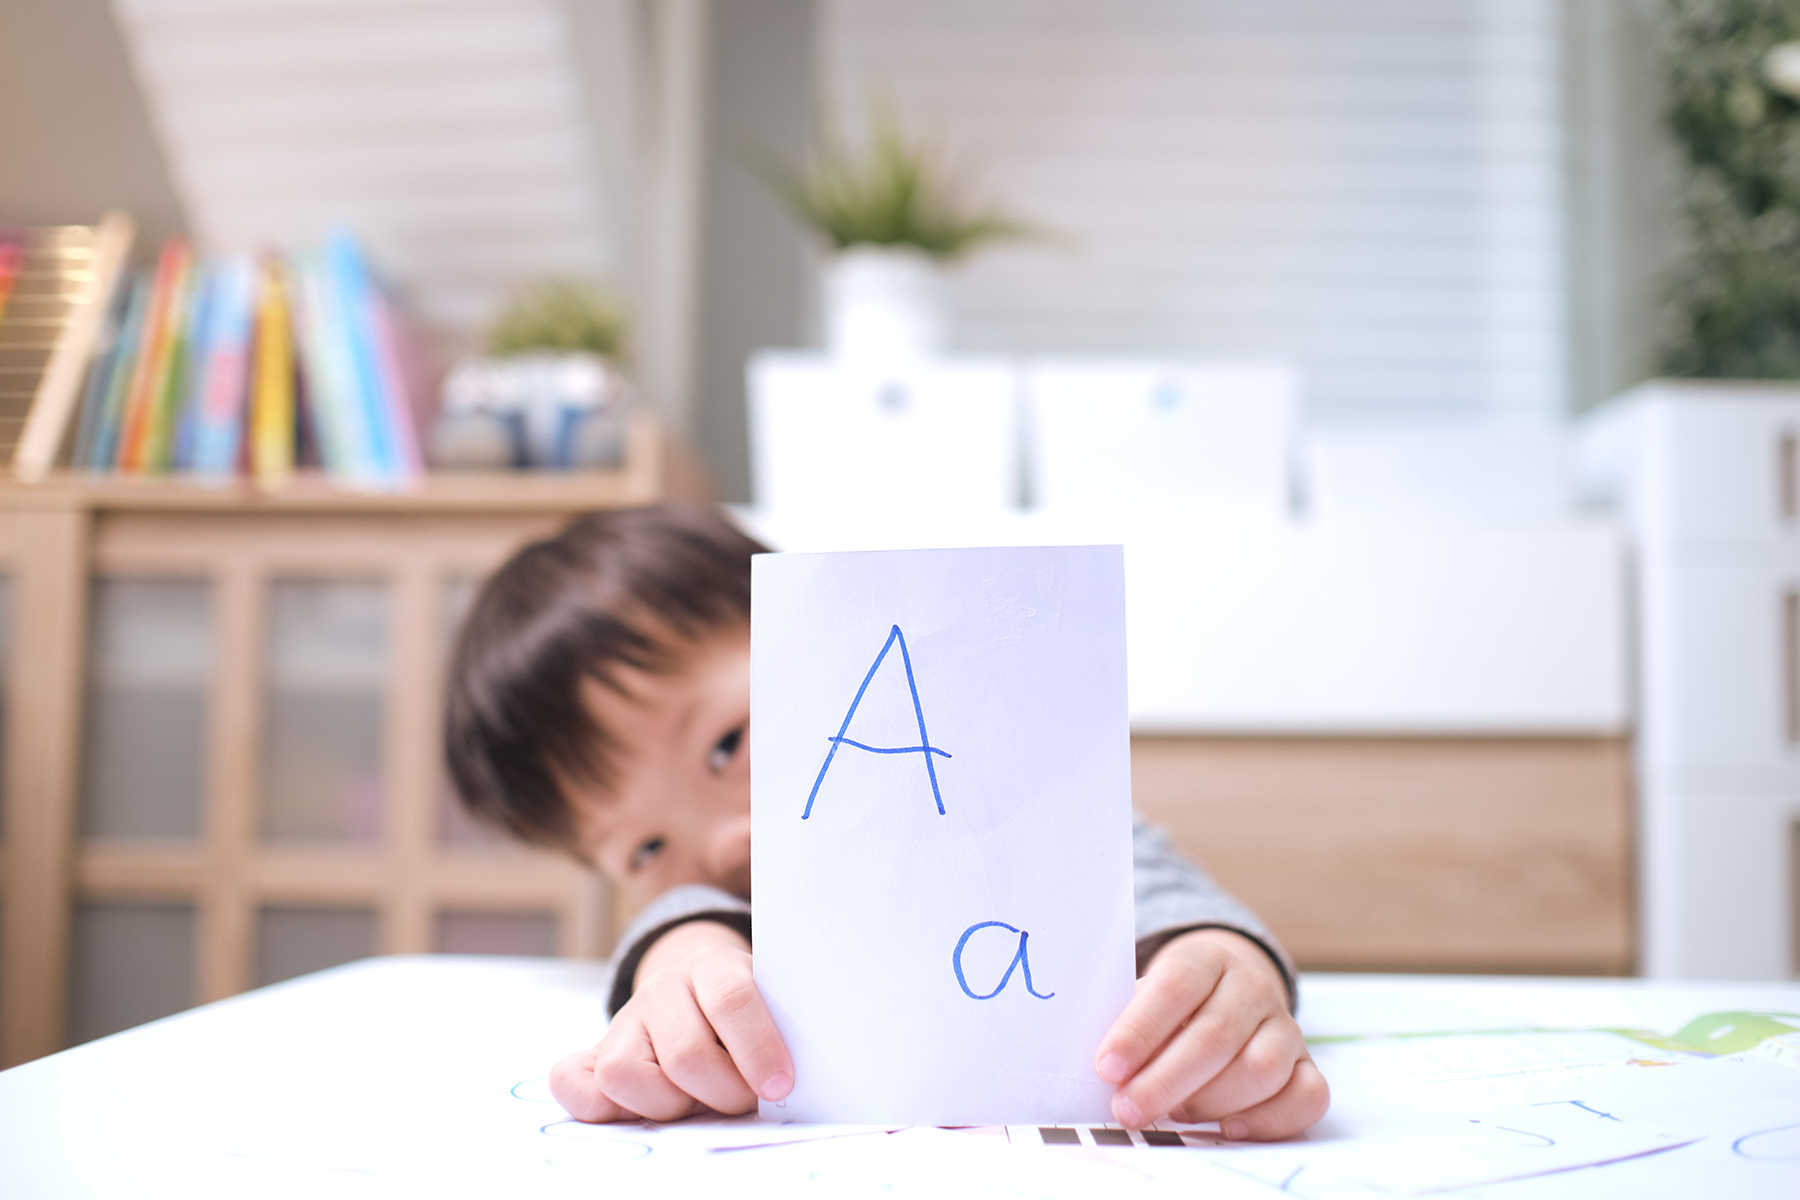 A photo of a young boy in his bedroom holding up a card that has a capital letter 'A' and a lowercase 'a' on it